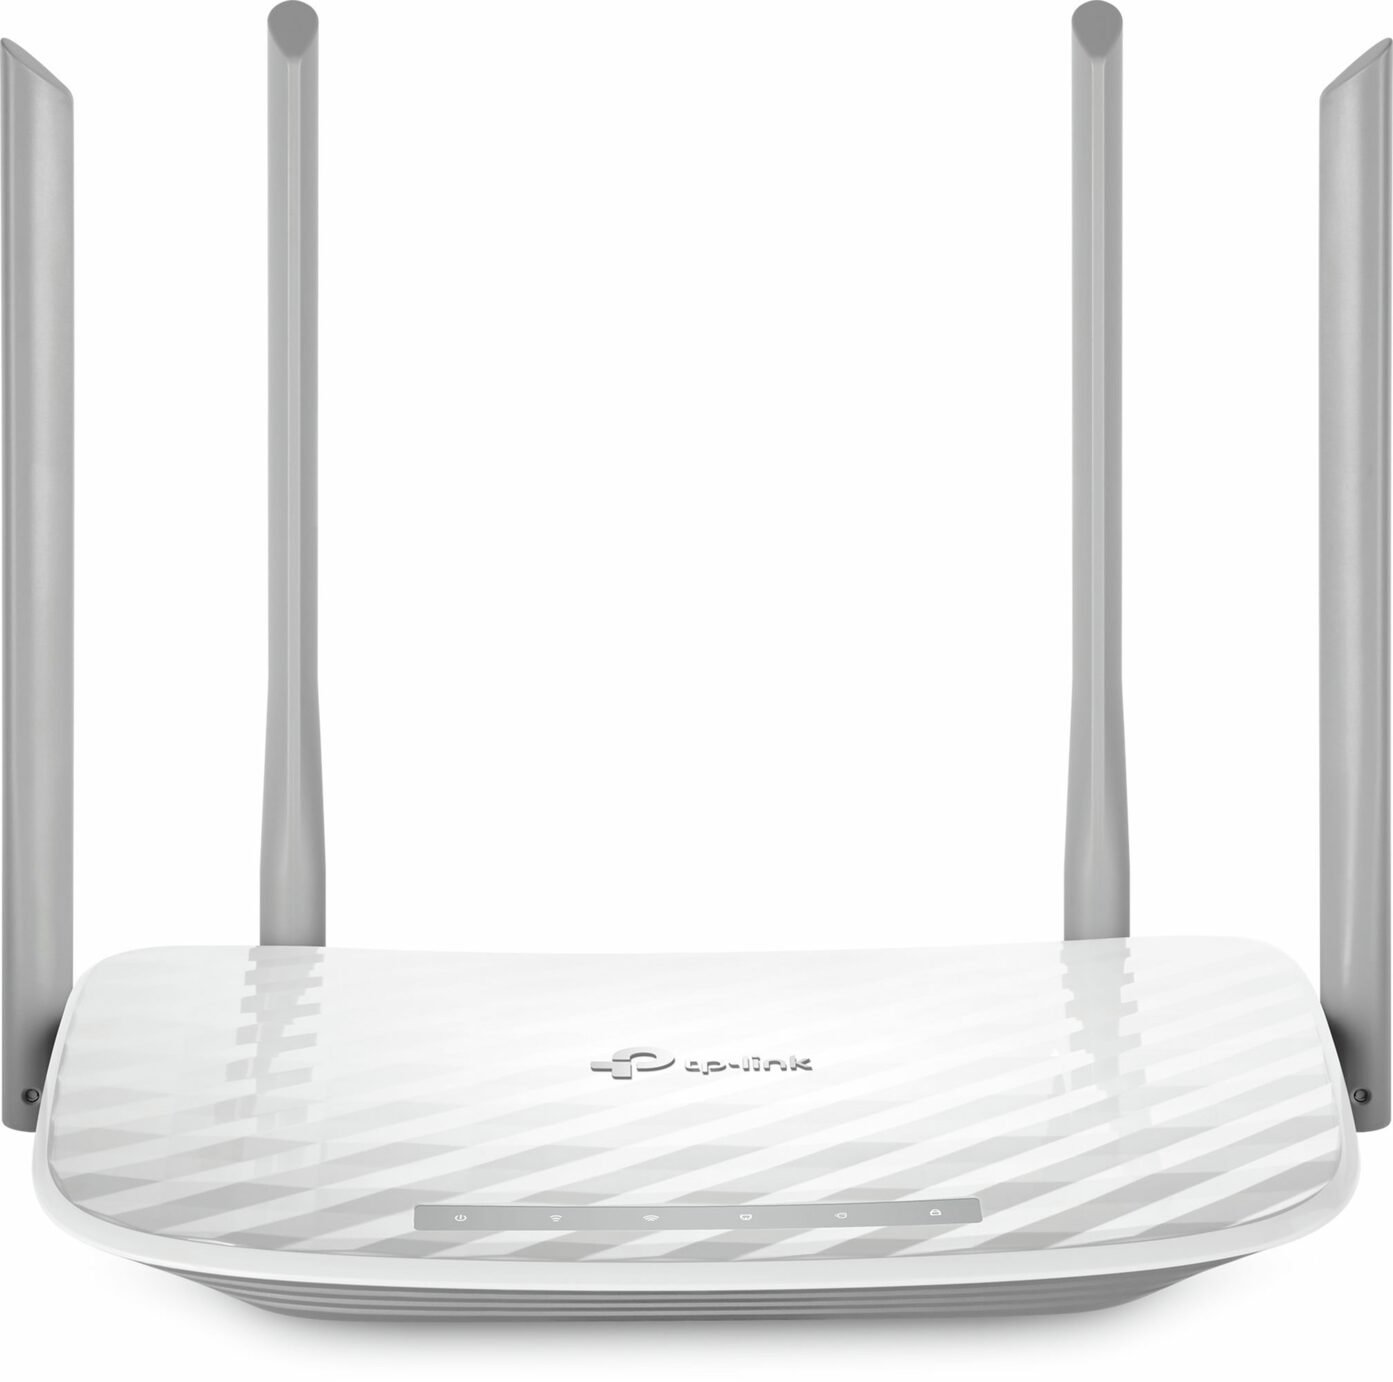 TP-Link Archer C50 AC1200 Dual Band Wireless Router Review